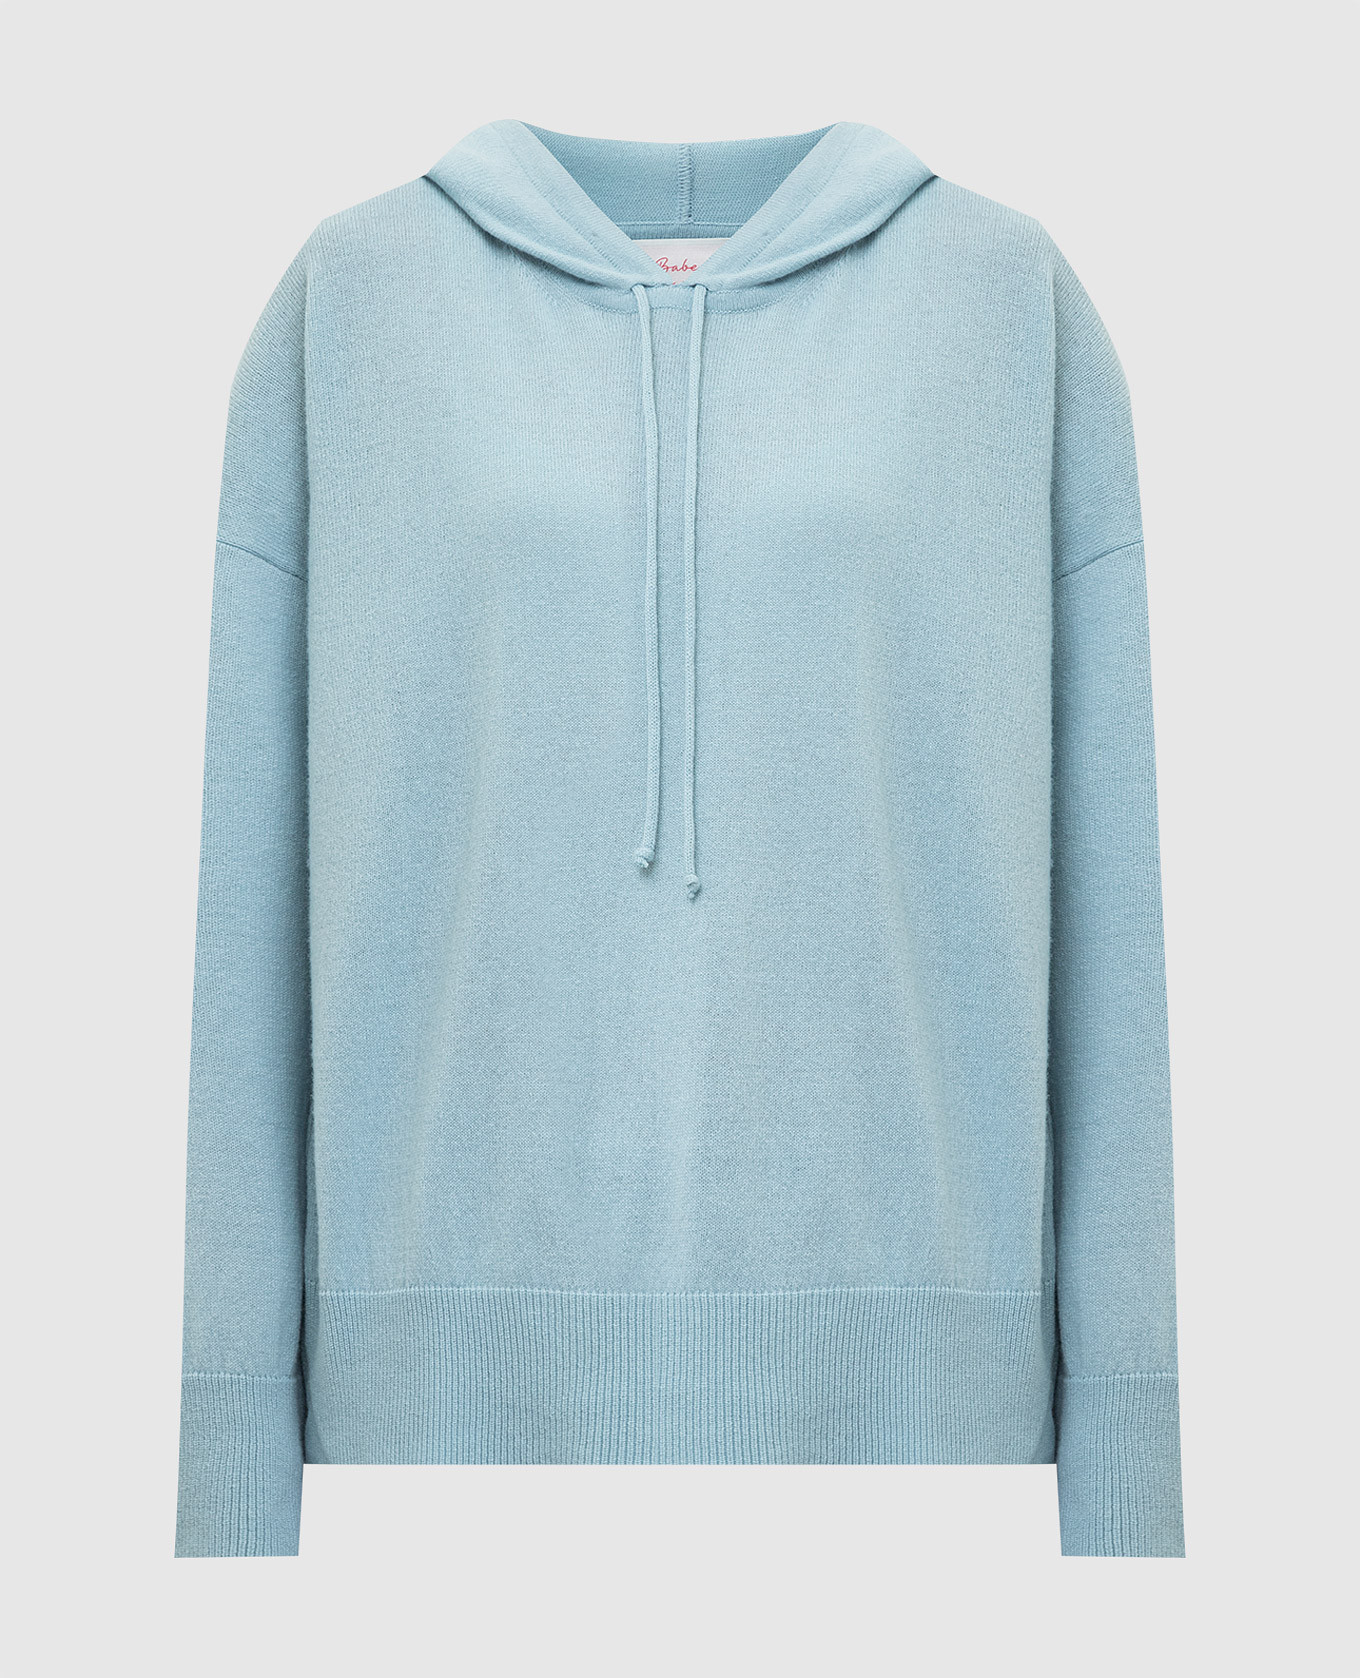 Blue wool and cashmere hooded jumper